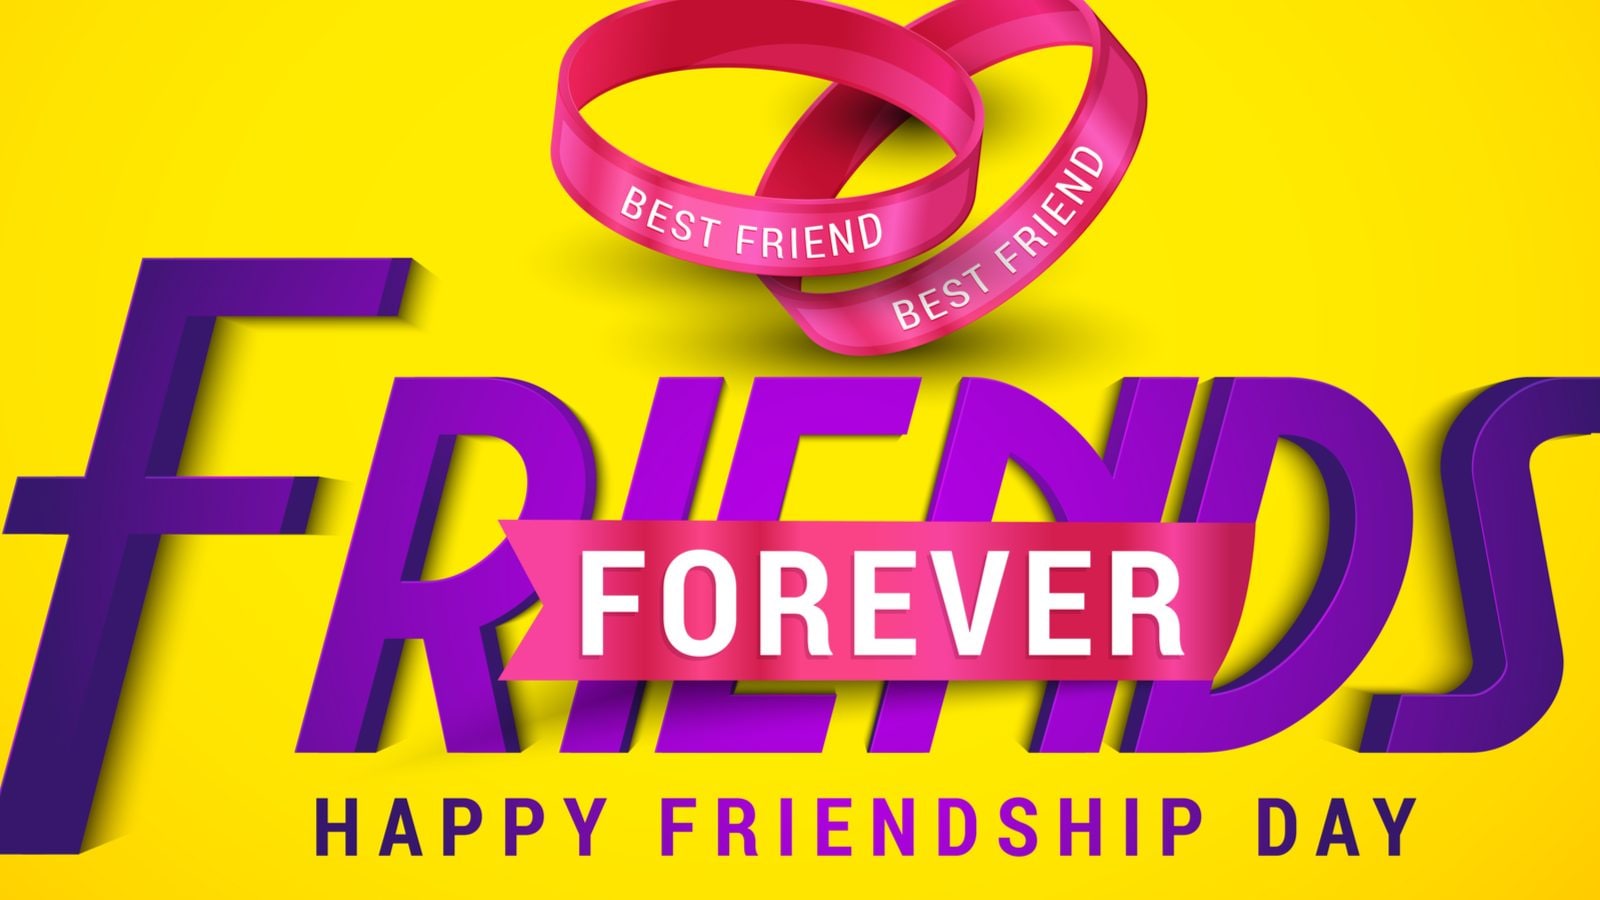 Happy Friendship Day 2021 Images, Wishes, Quotes, Messages and